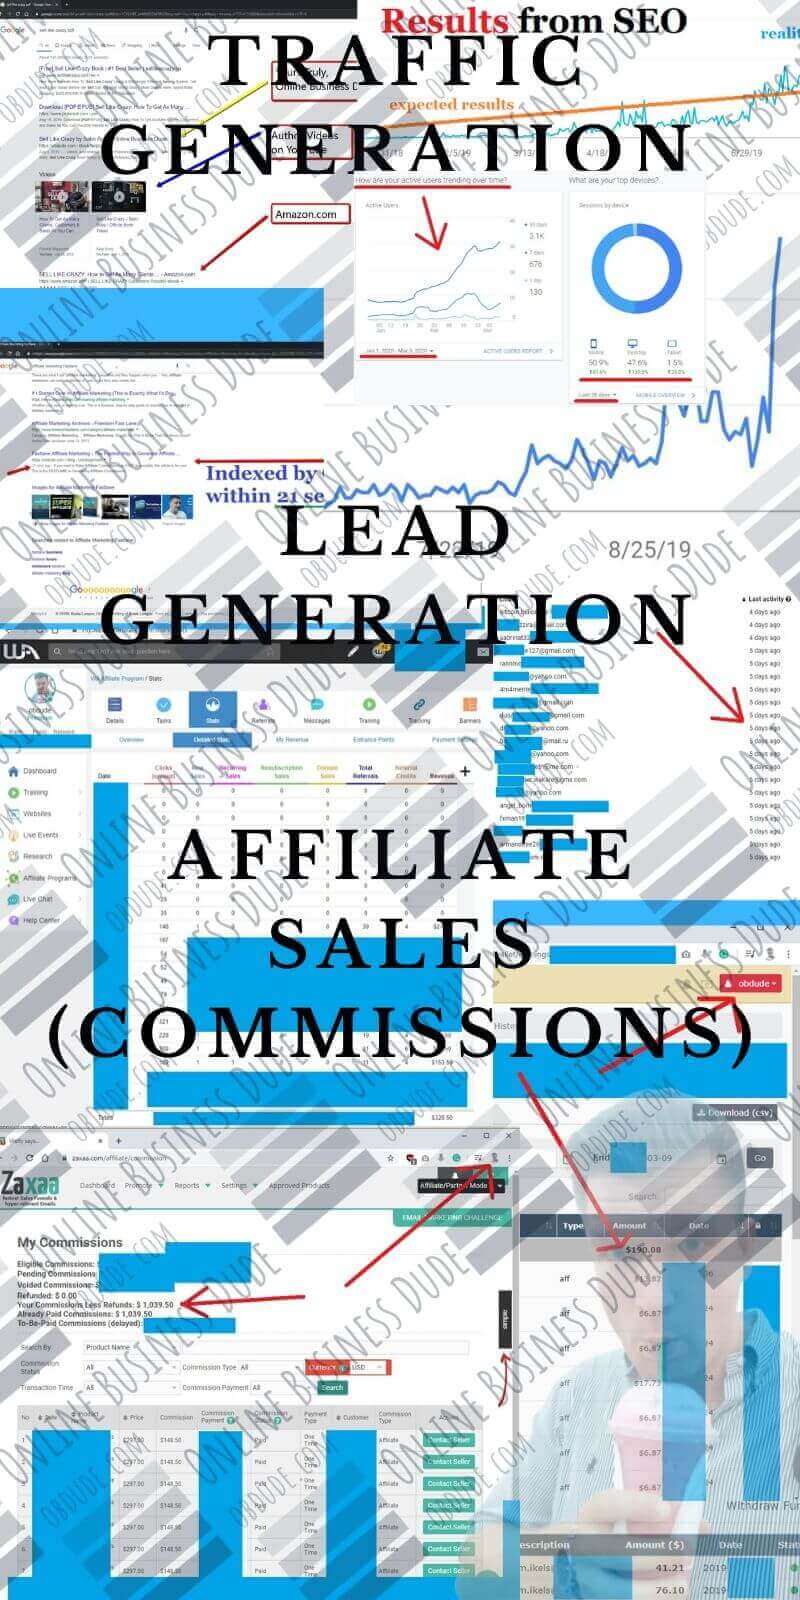 Excerpt of results from affiliate marketing